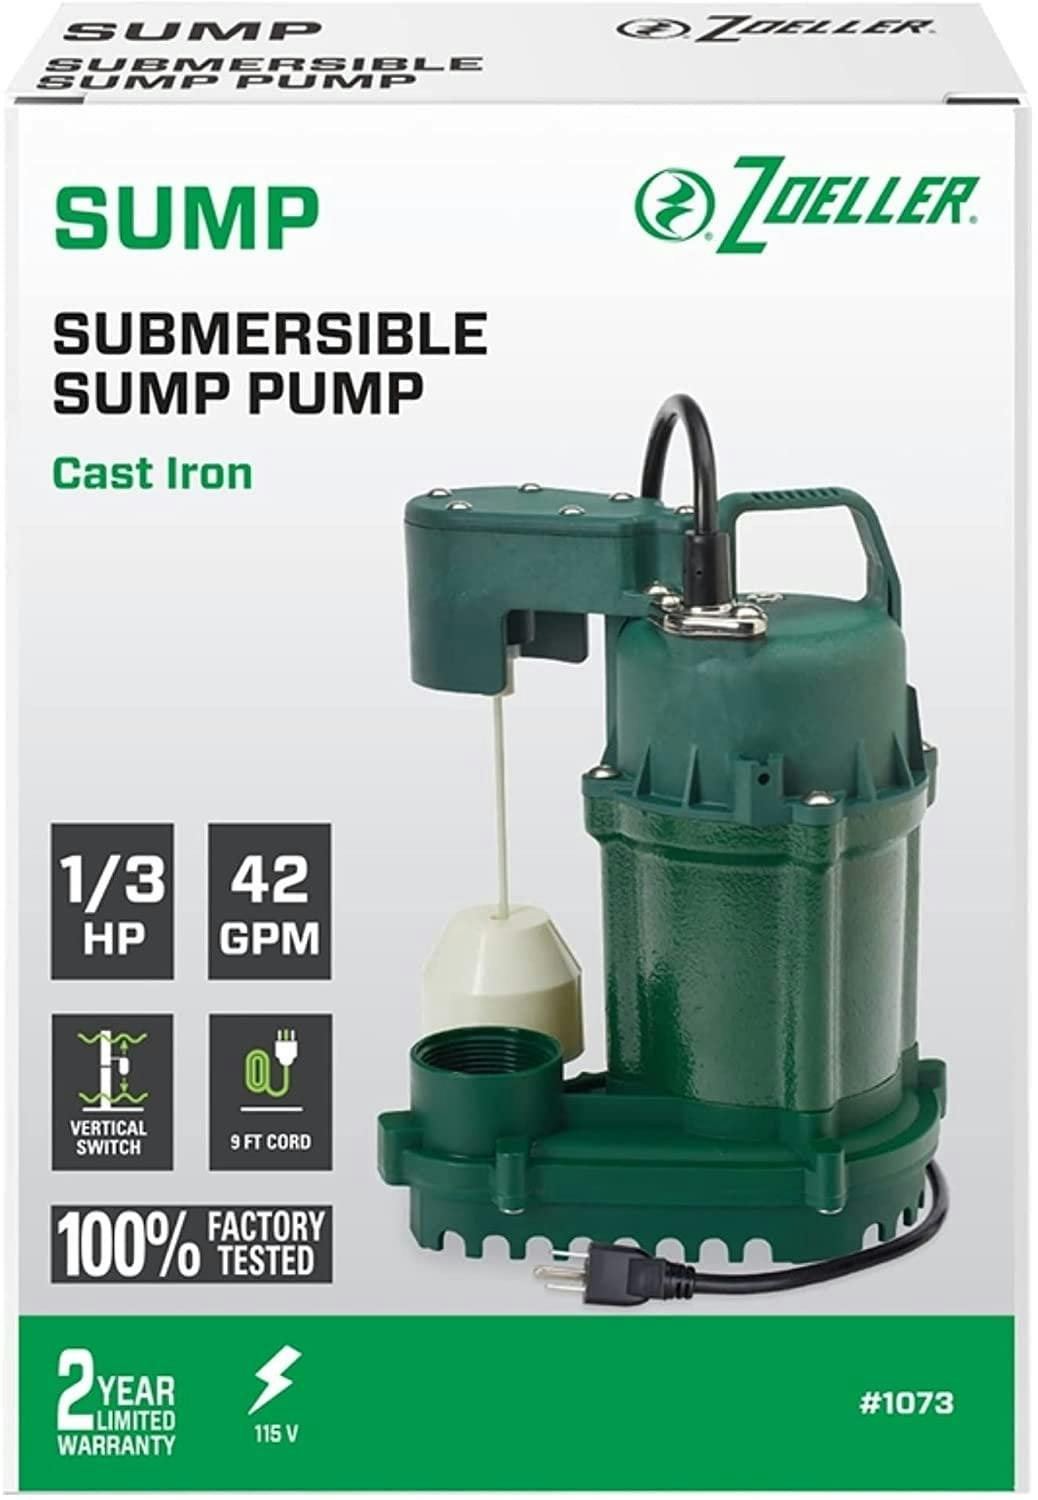 Rugged Cast Iron 1/3 HP Submersible Sump Pump with Vortex Impeller